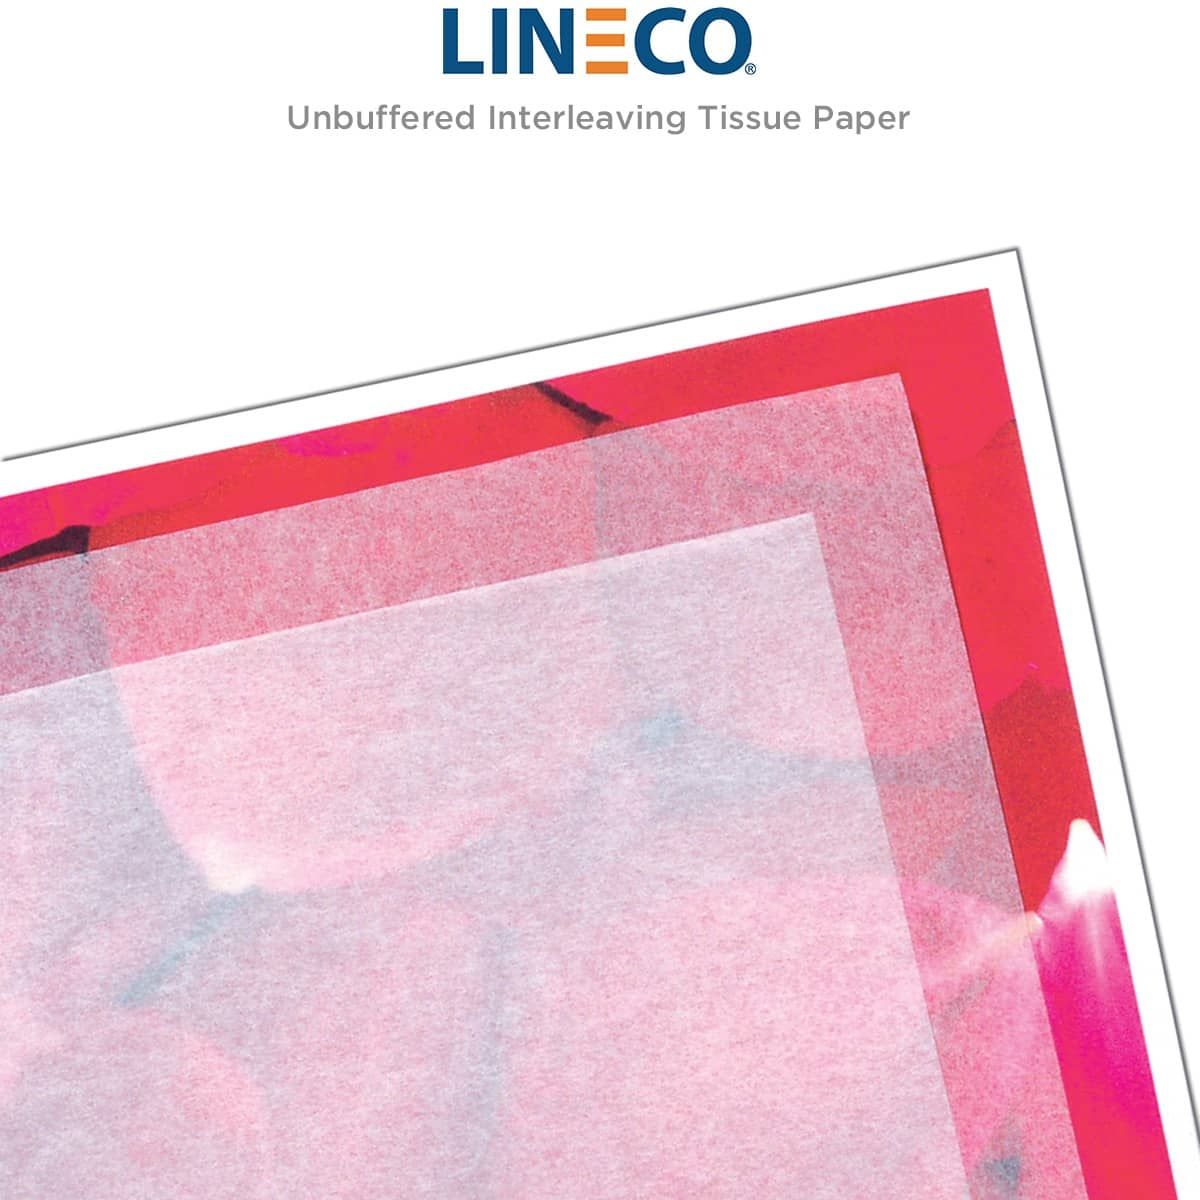 Lineco Unbuffered Acid-Free Tissue Paper, 30x40, Pack of 12